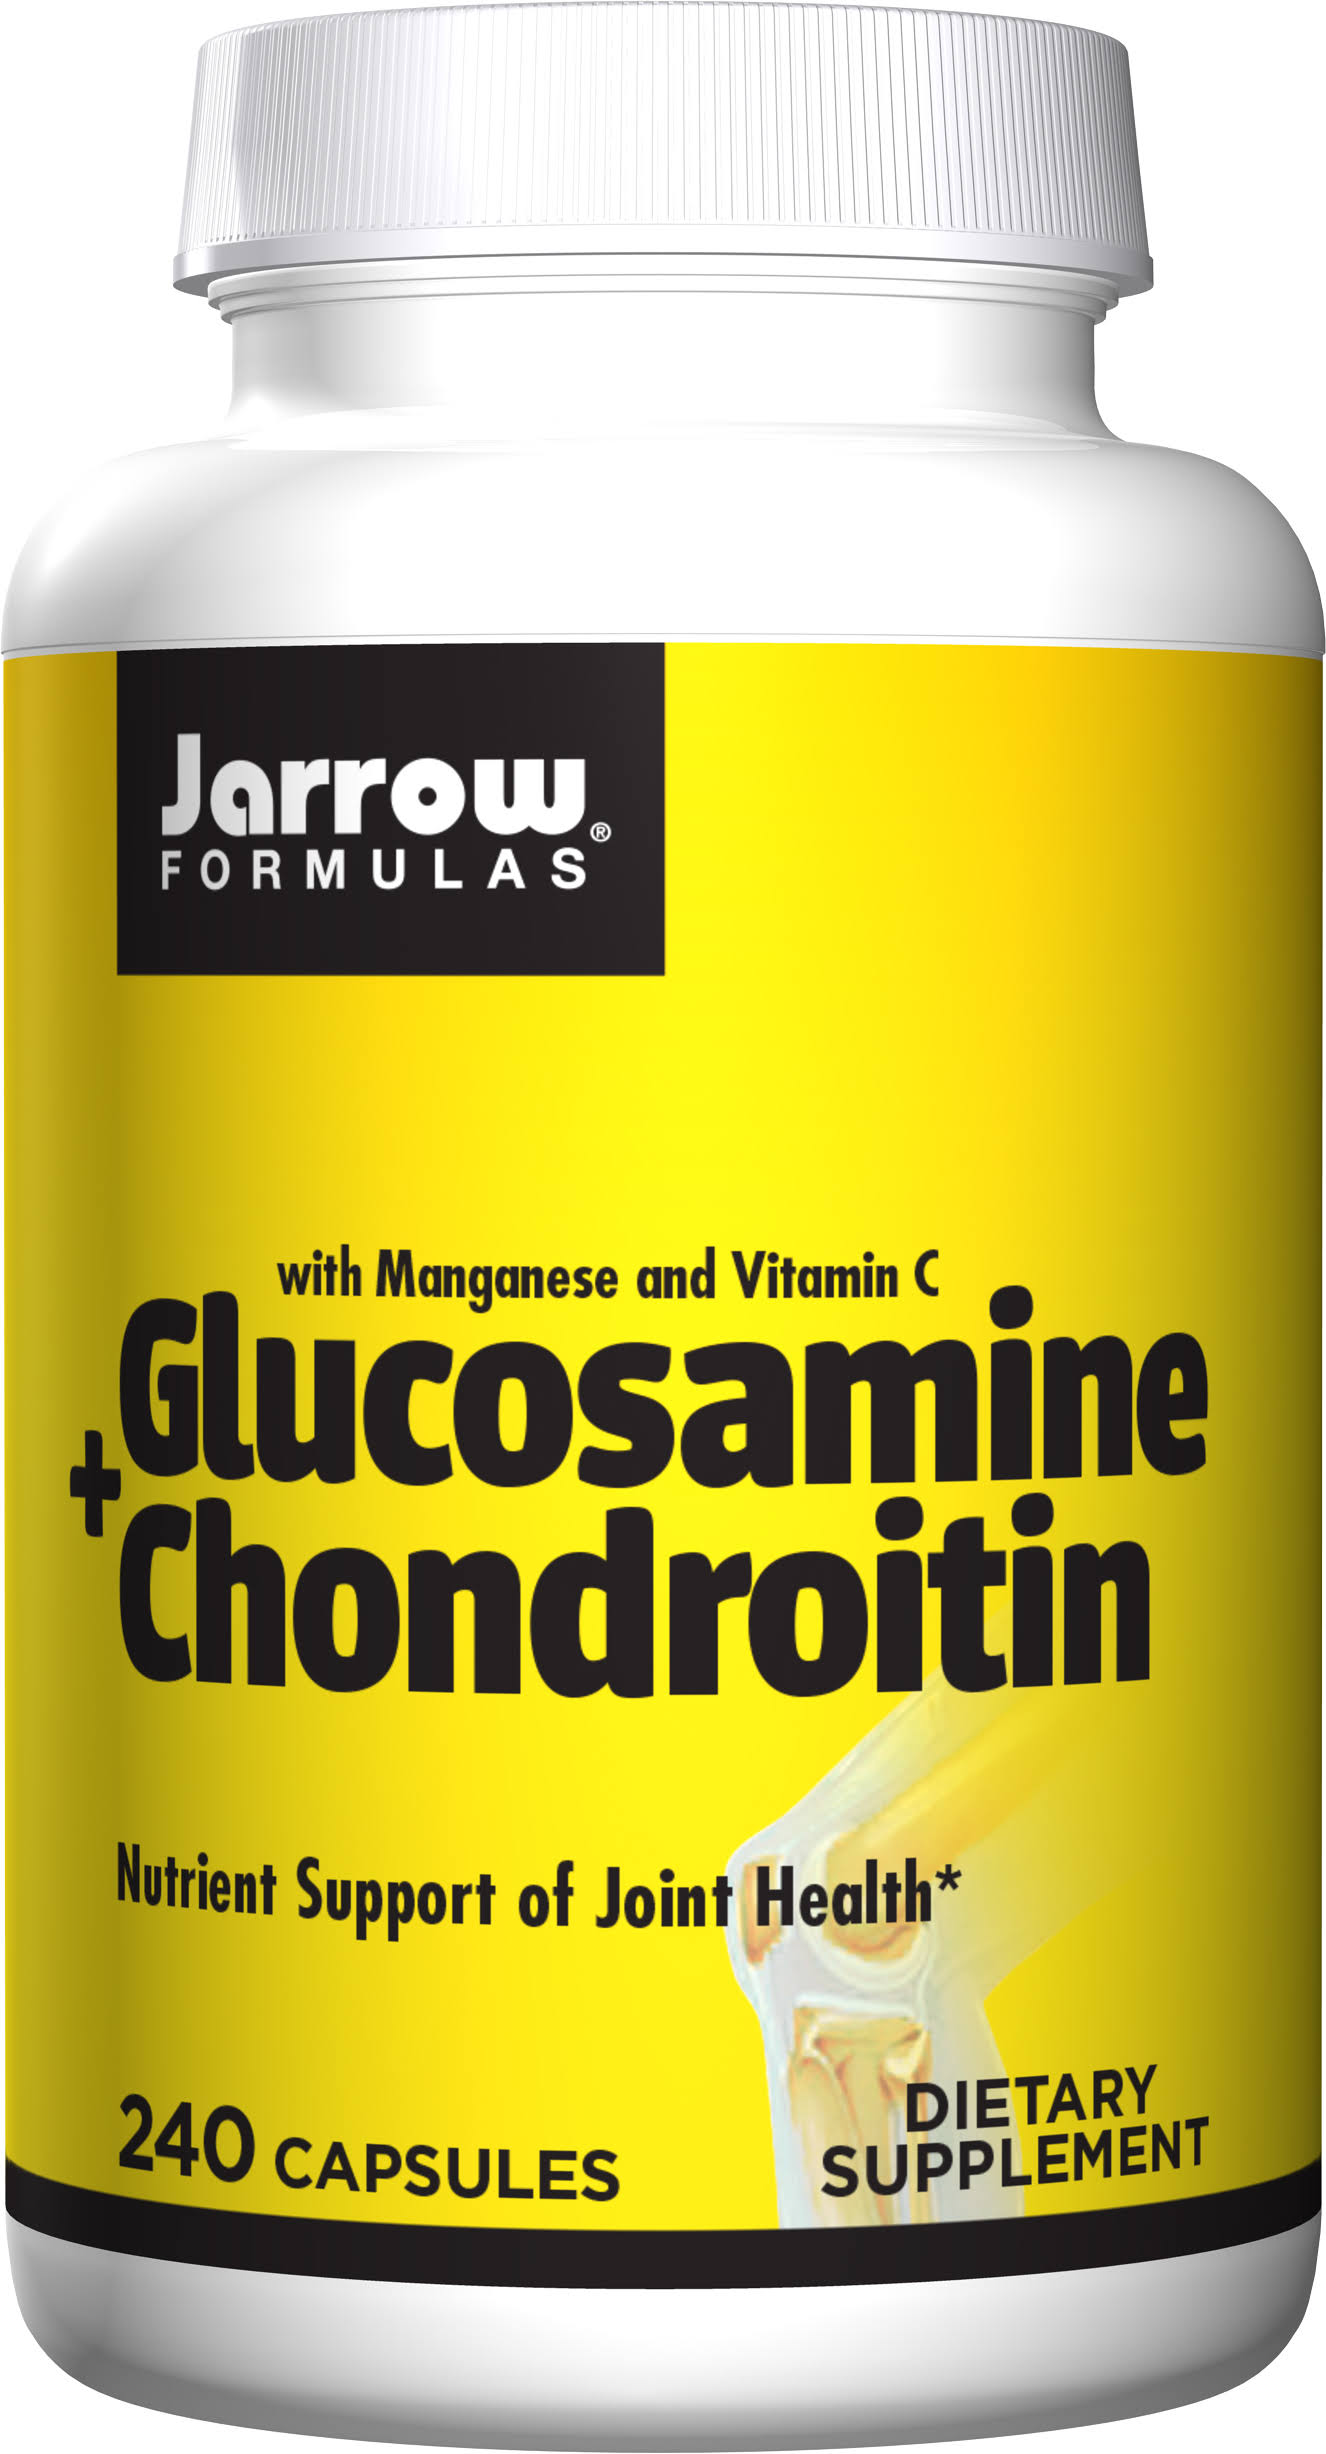 Jarrow Formulas Glucosamine and Chondroitin Supplement - Supports Joint Health, 240 Capsules